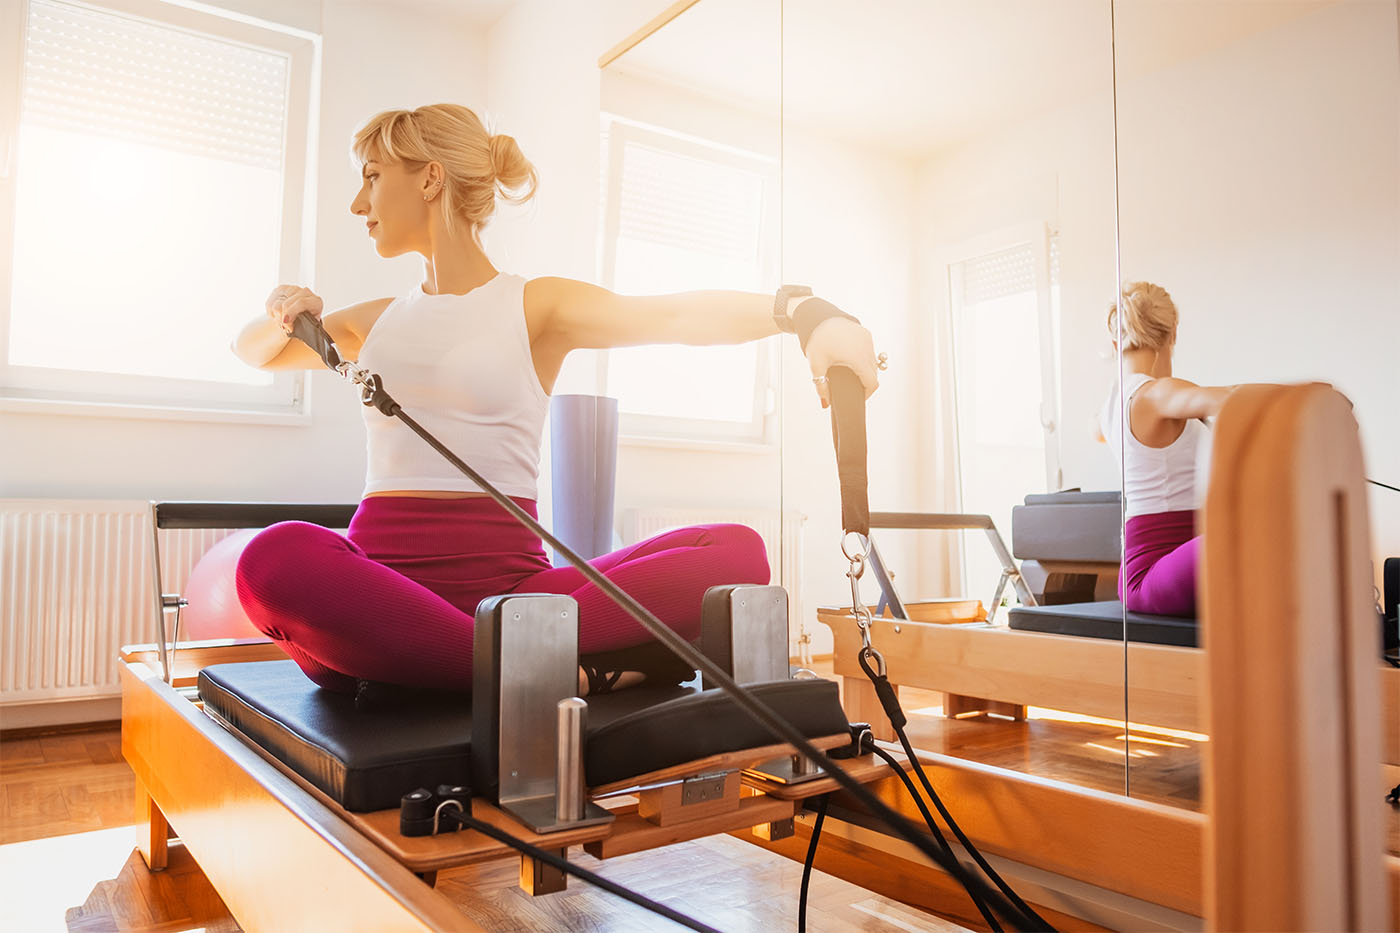 Woman is exercising on pilates reformer bed in her home.